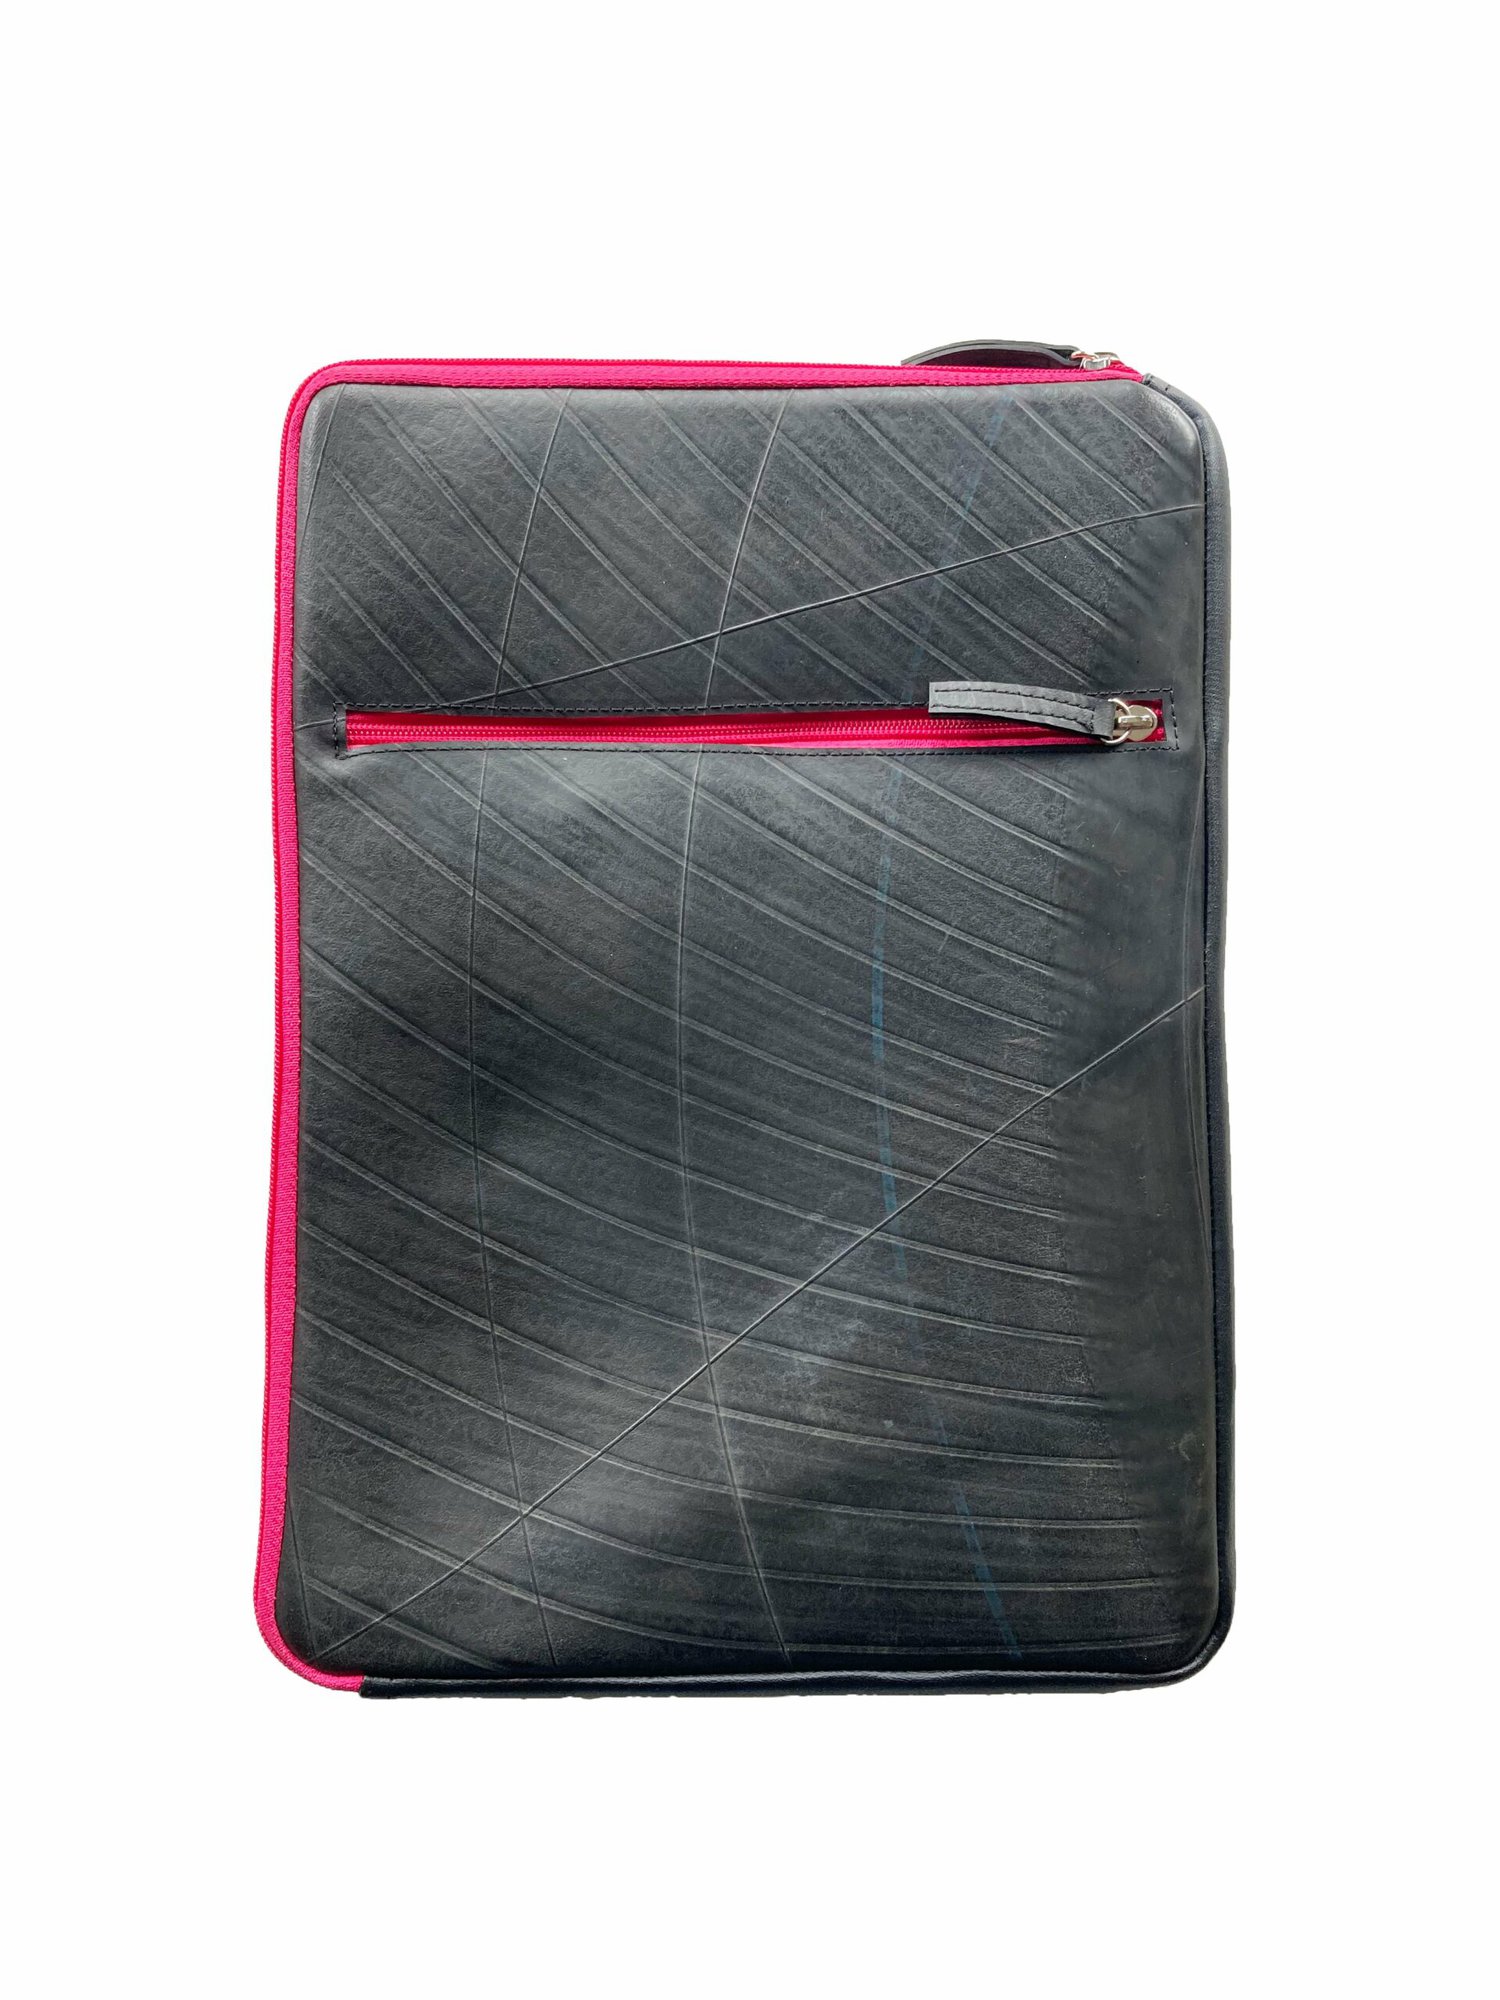 Recycled Inner Tube Sleeve Case For Laptops Up To 15 Inch - - Pink